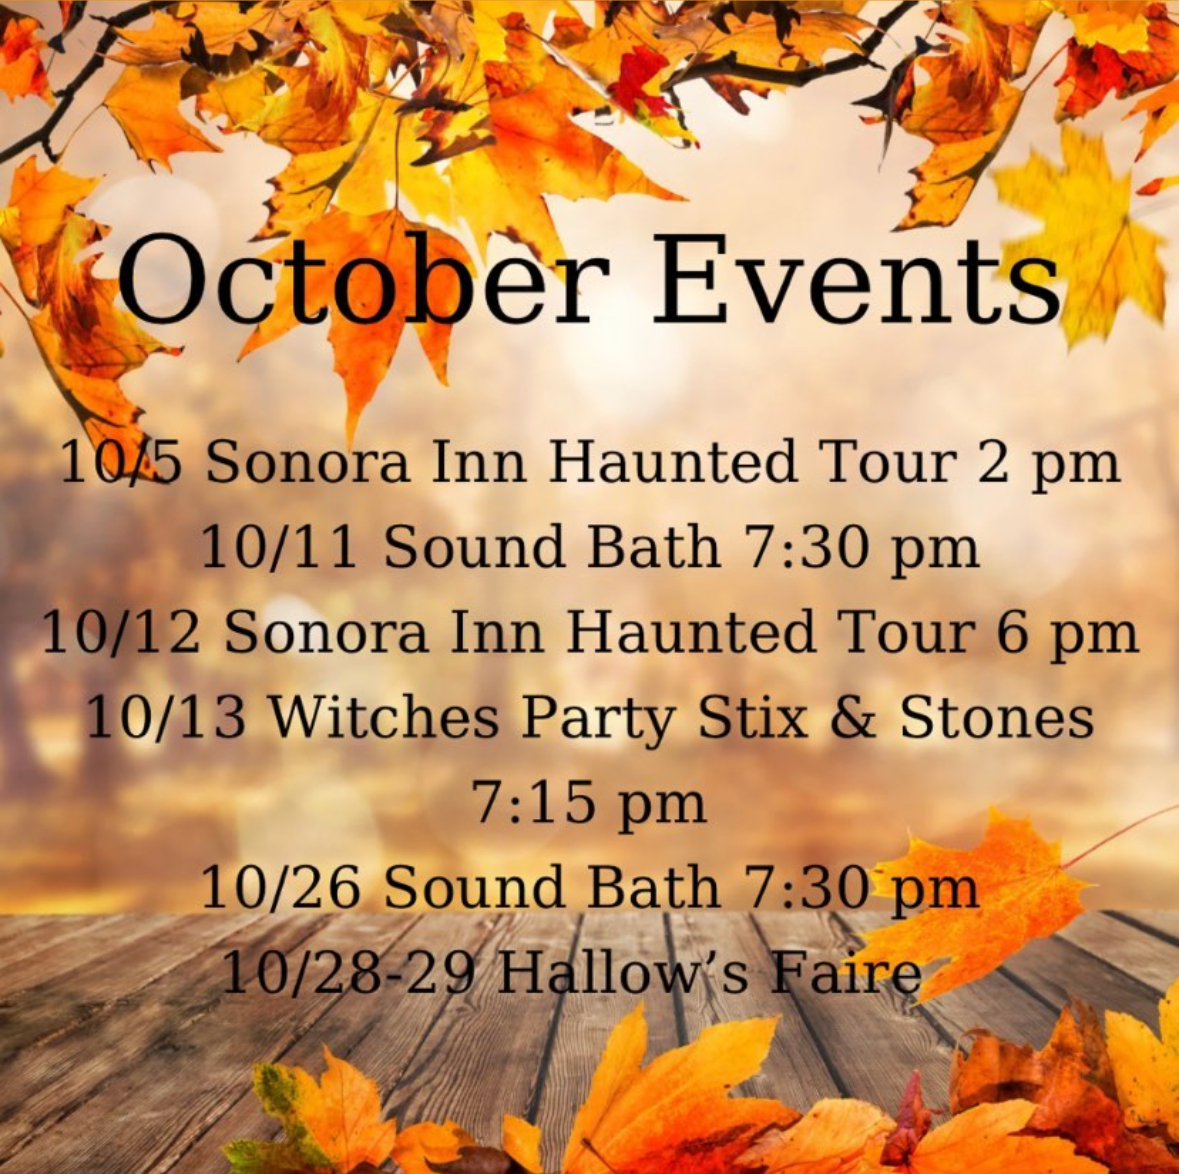 There+are+many+upcoming+events+to+attend+locally%2C+so+there+will+be+no+shortage+of+fun+things+to+do+for+this+Halloween+season.